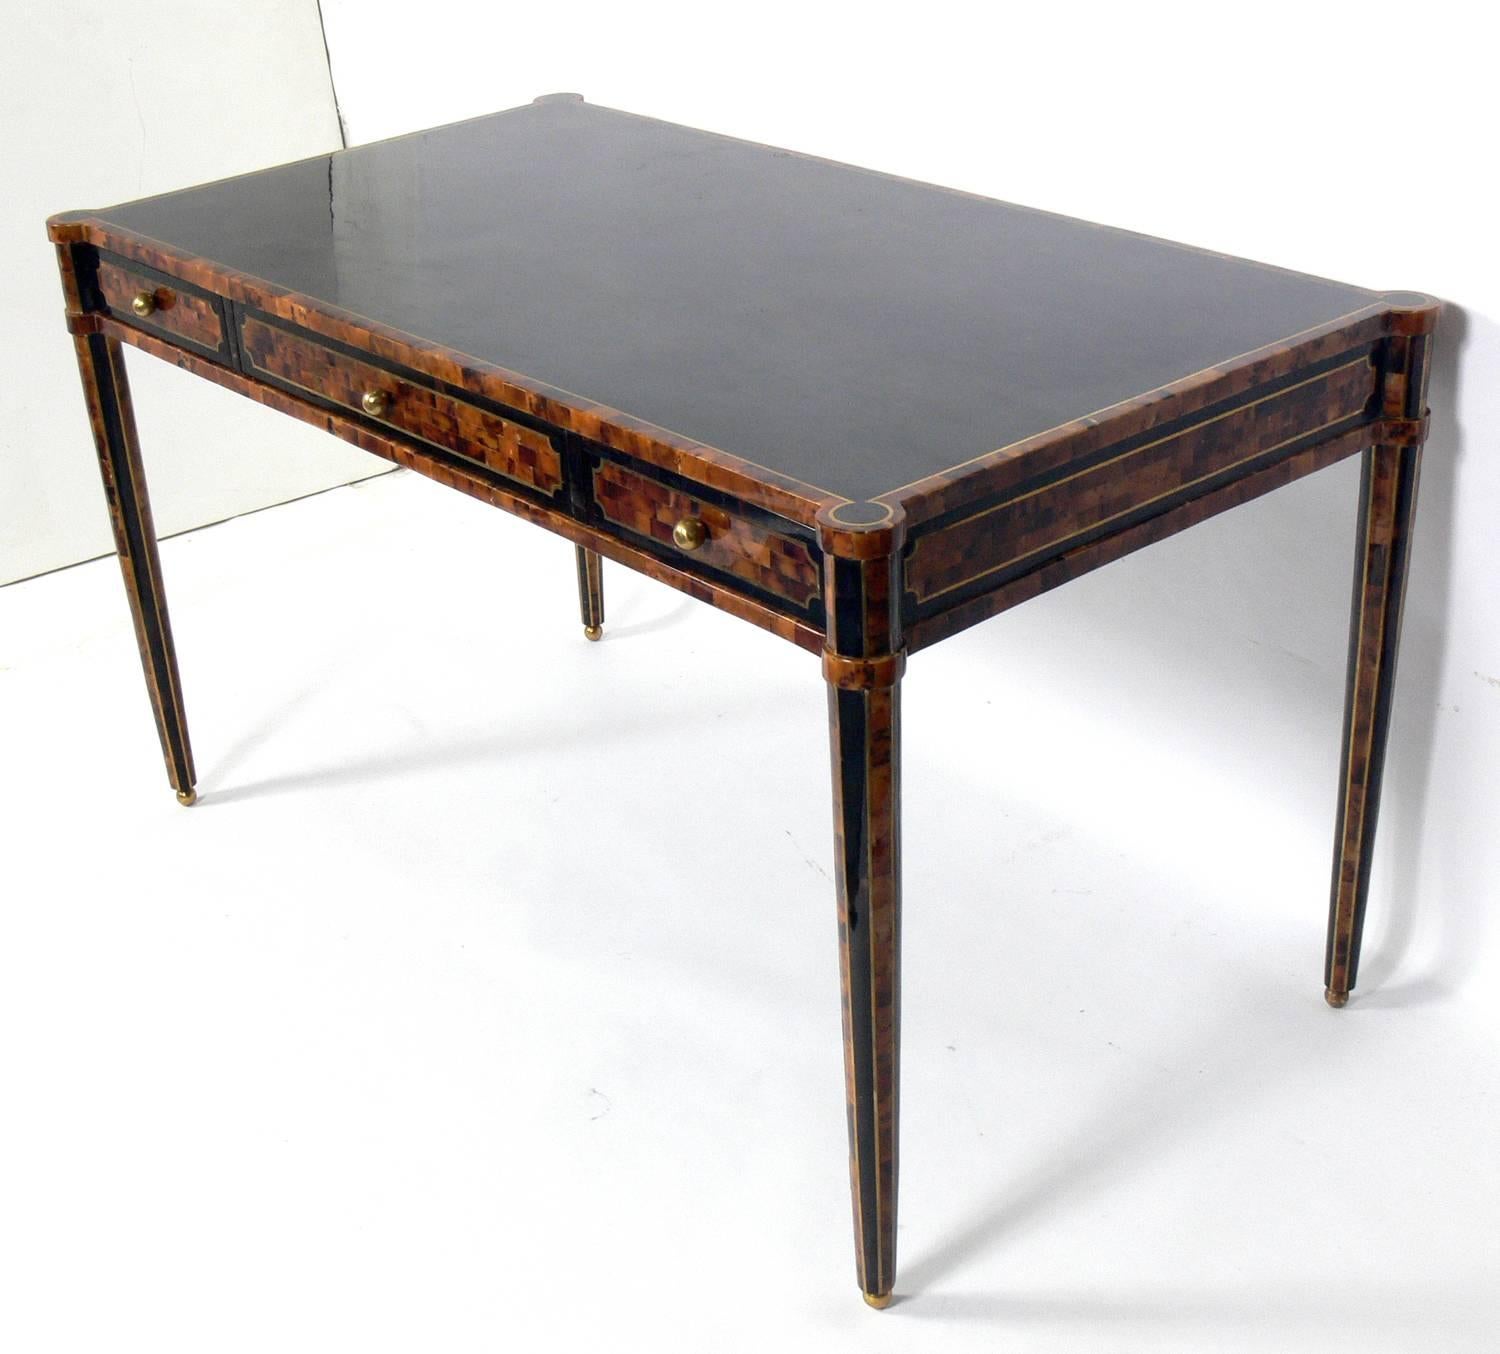 Tessellated horn desk, designed for the Maitland Smith Company, circa 1980s. It is executed in lacquered tesselated horn with brass inlay over a wooden frame. It is a versatile size and will work well as a desk, vanity, or bar. Signed with Maitland